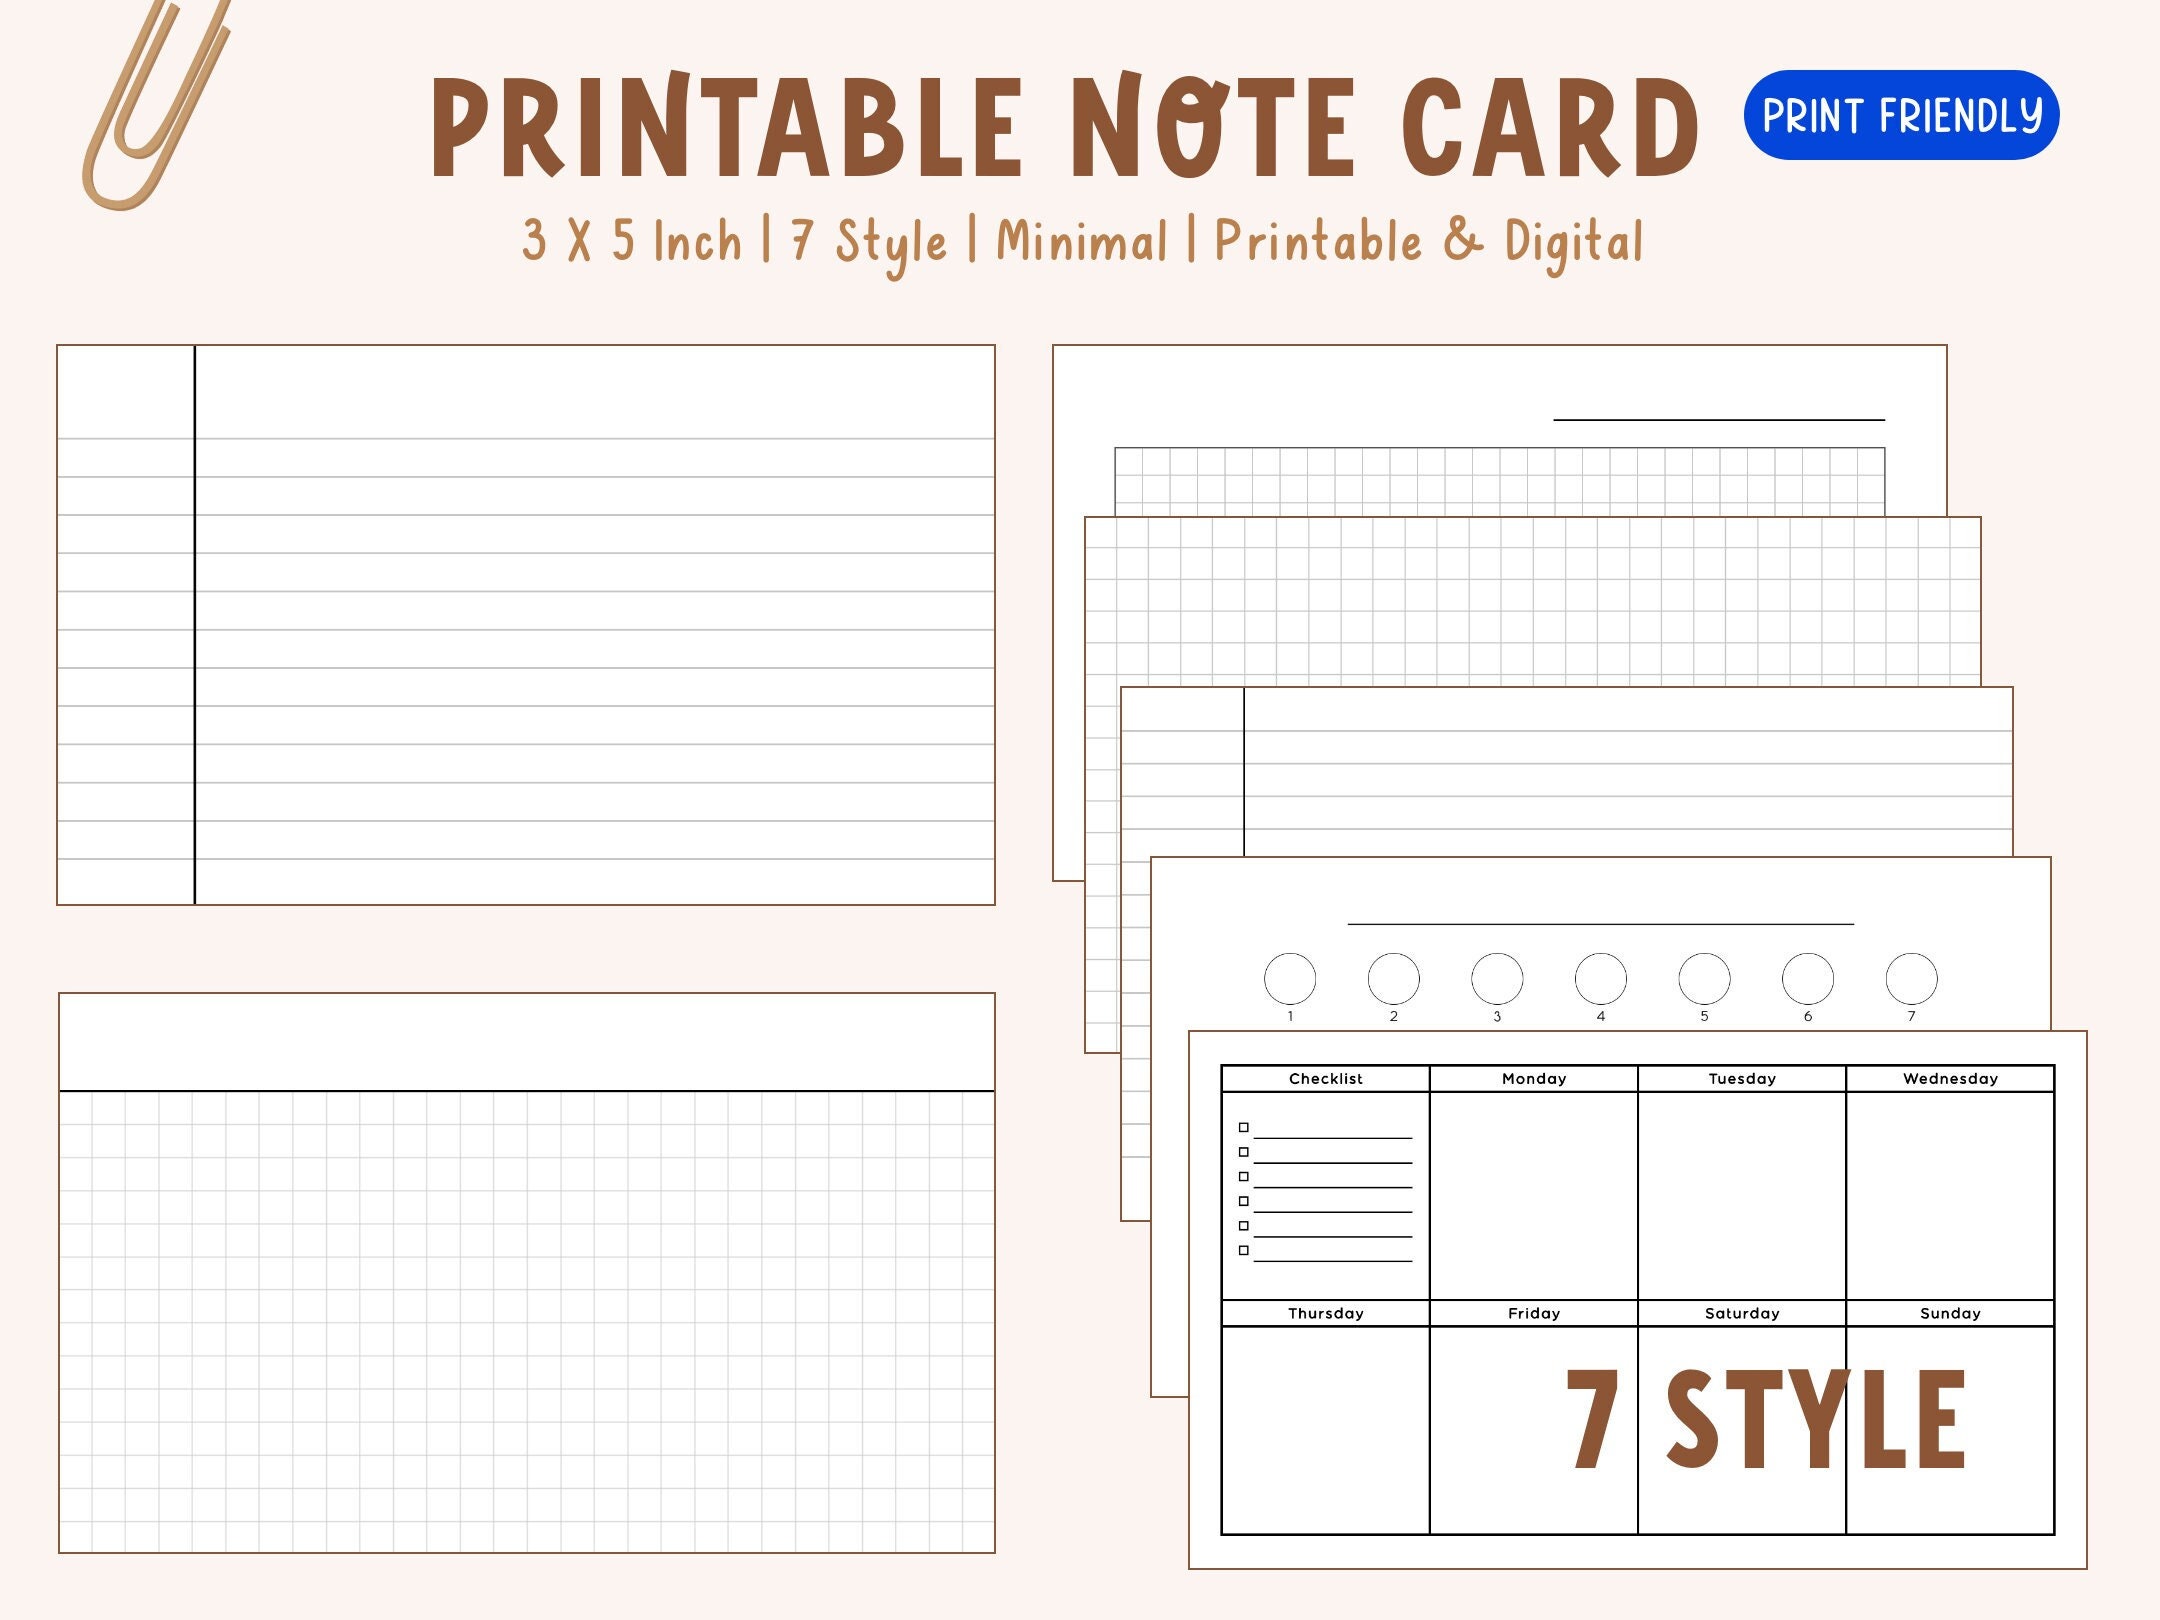 Printable Index Card Templates: 3×5 and 4×6 – Tim's Printables  Card  templates printable, Note card template, Printable flash cards